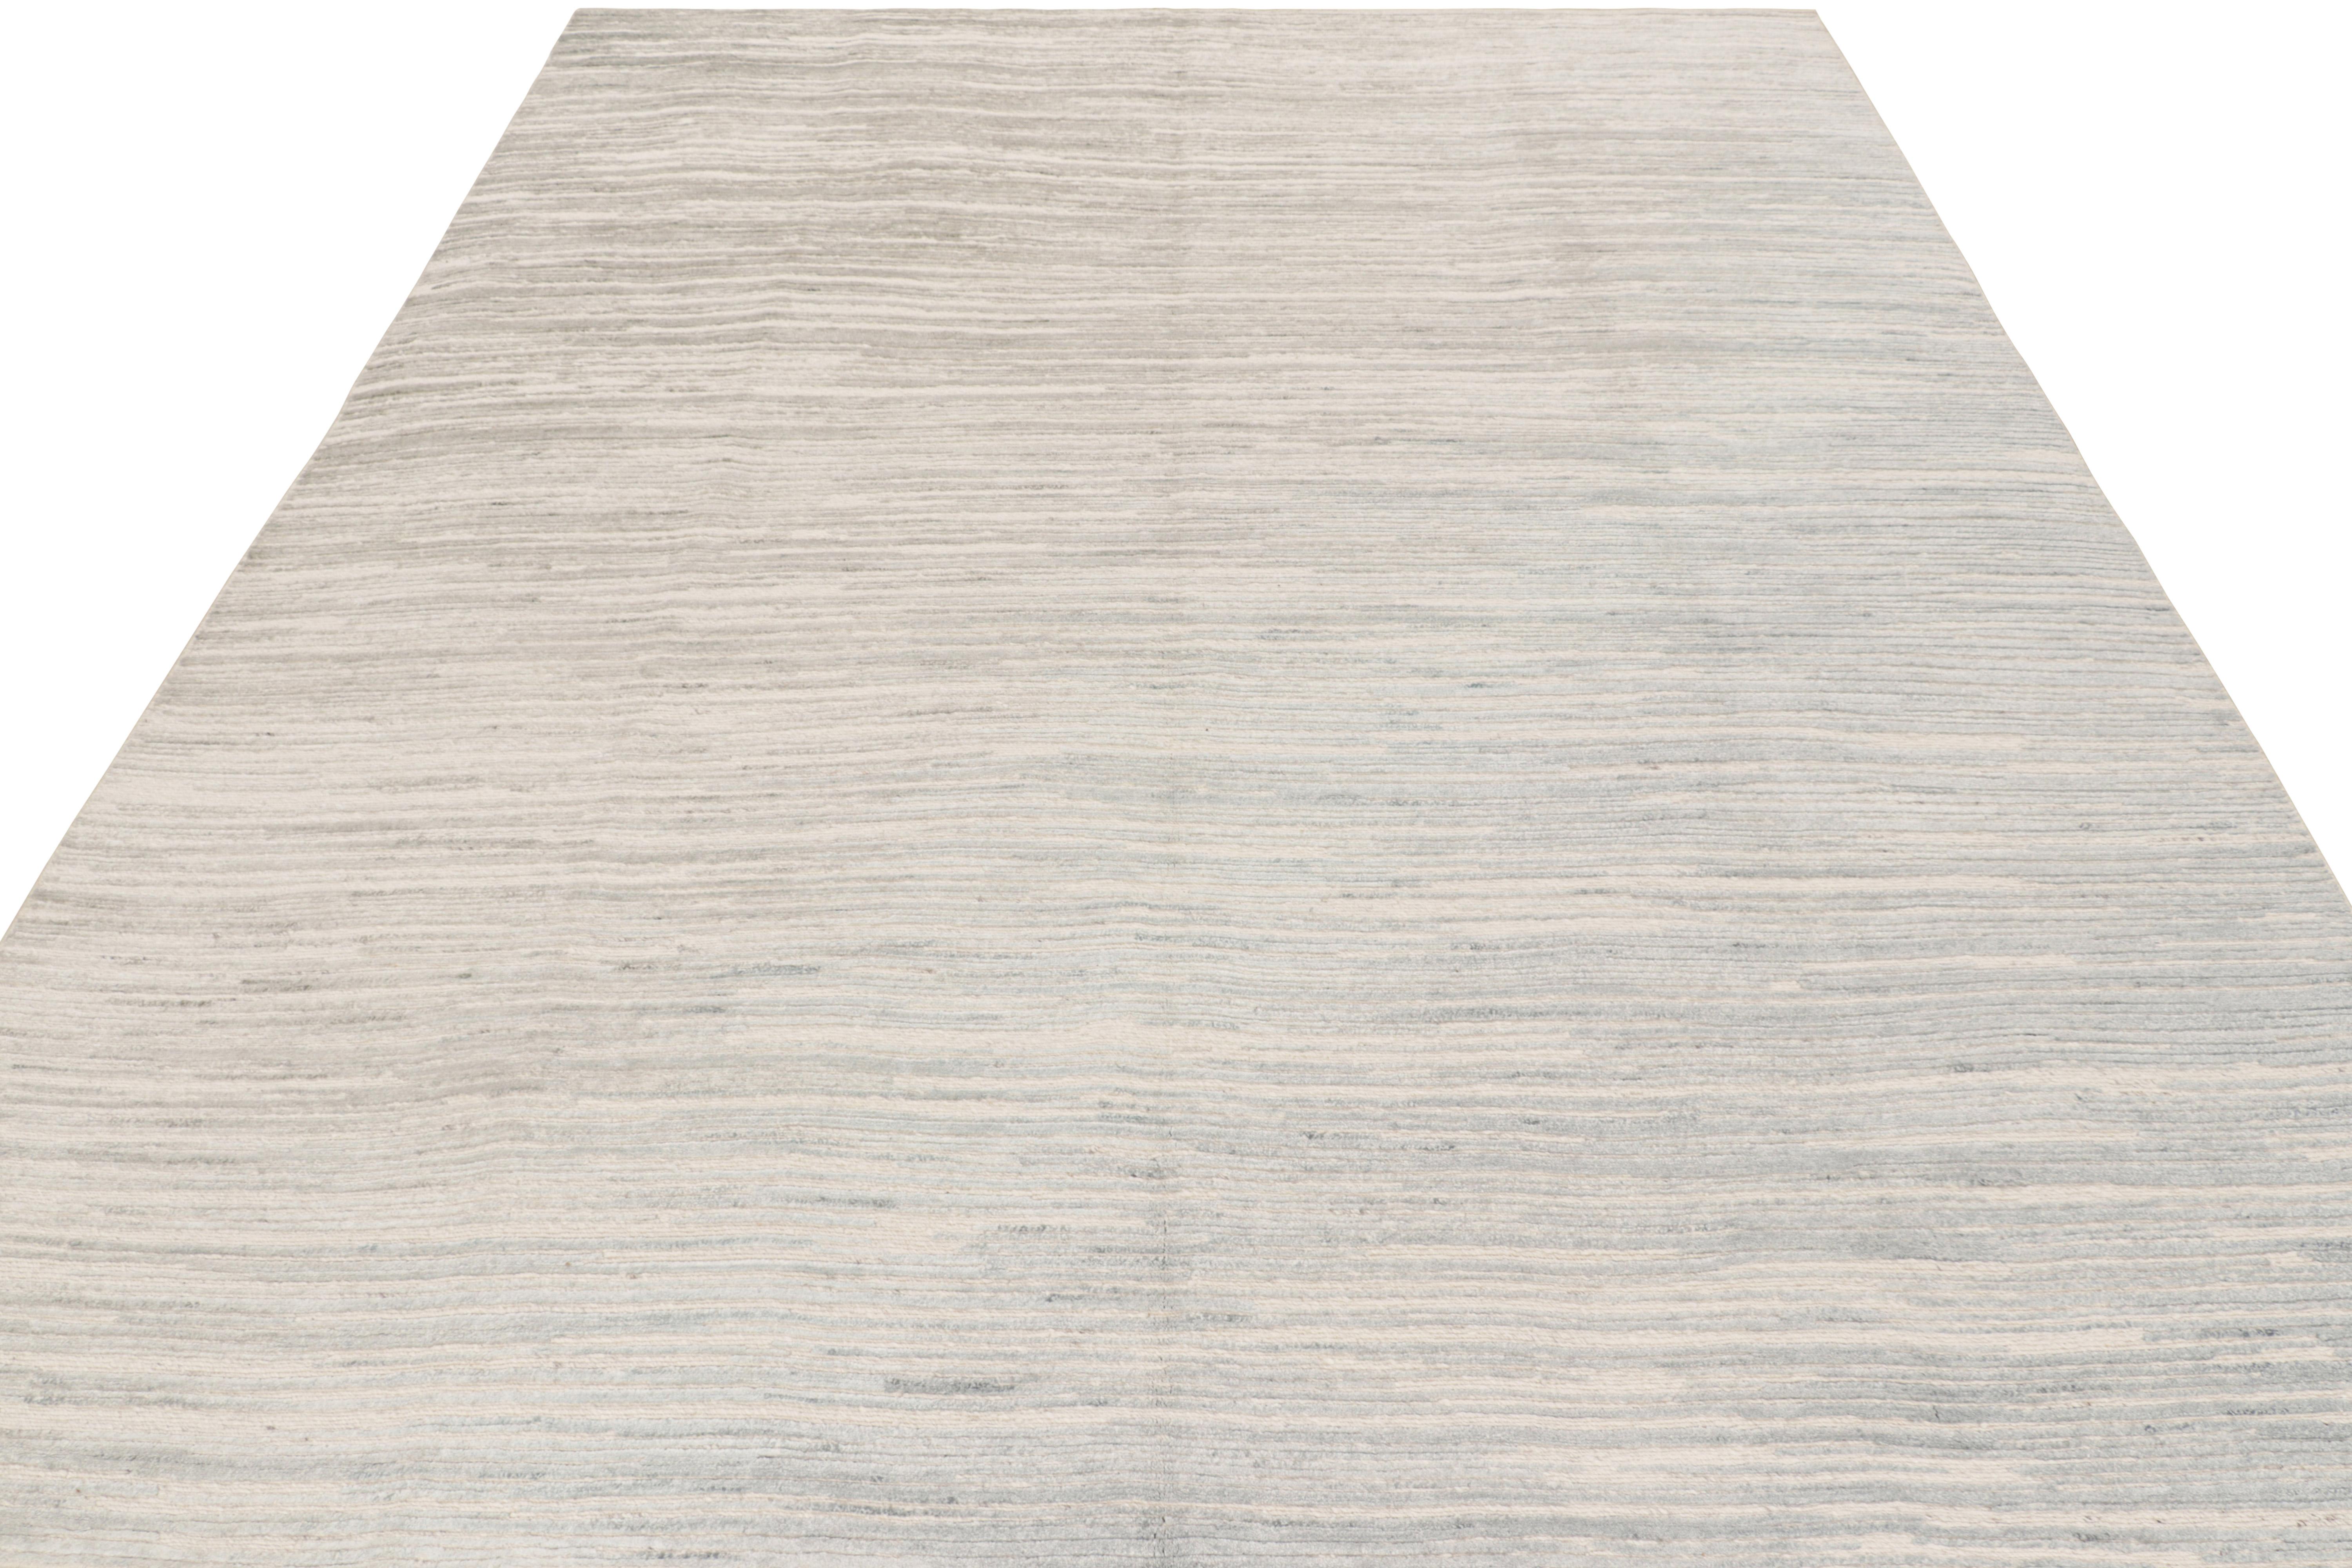 Hand-Woven Rug & Kilim’s Textural Rug in White and Cream-Gray Abstract High-Low Stripes For Sale